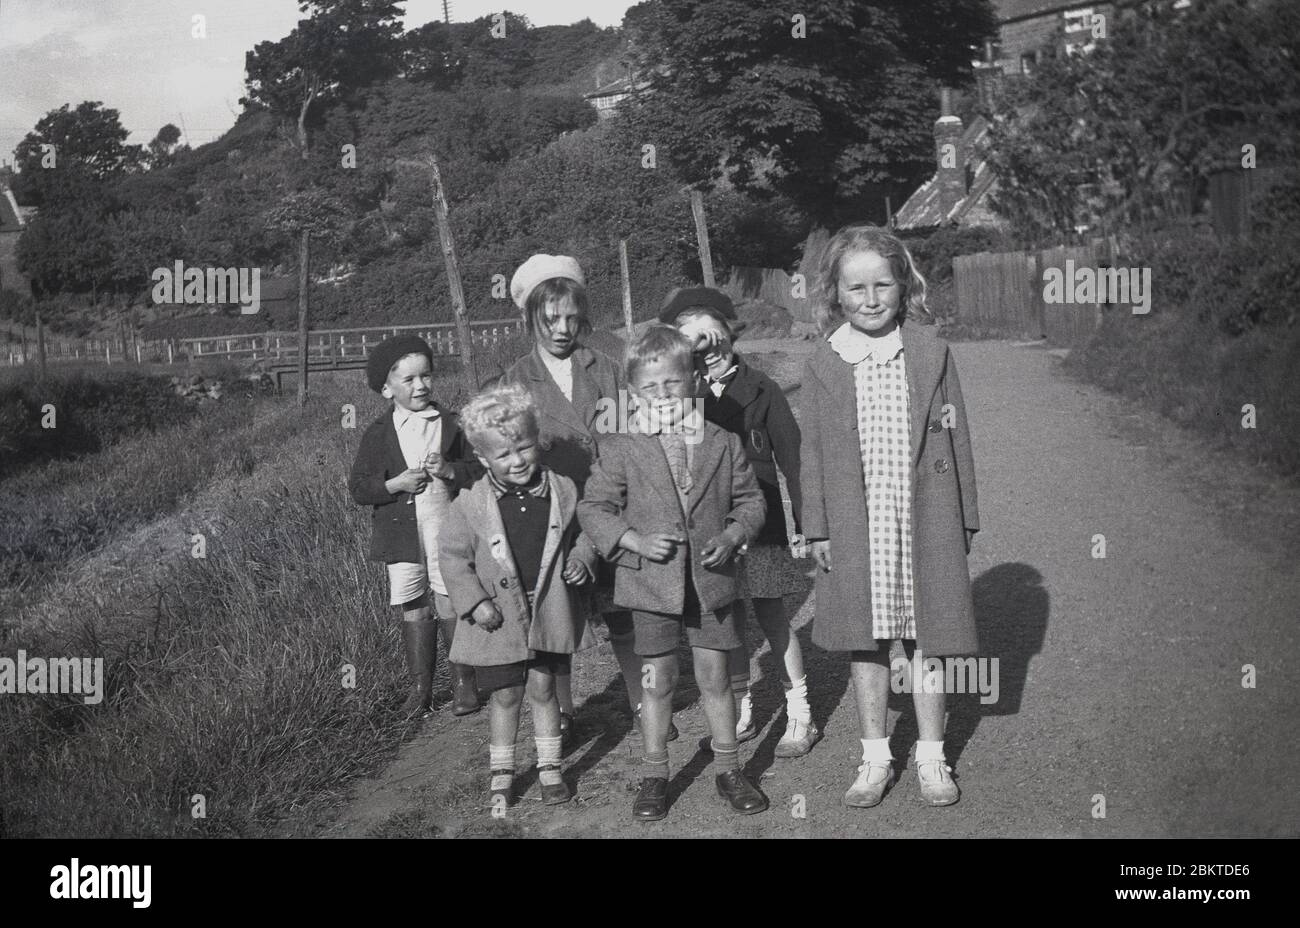 1940s, historical, Standing ouutdoors on a footpath, a small group of young children, with the little boy in a pair of shorts and jacket at the front looking like he is their leader.  Growing up in Britain this era, children had the freedom to play with their friends outdoors, having a kind of 'childhood gang' that later generations would miss. They could have adventures with their mates, growing up heathly, active, involving imagination and play. Stock Photo